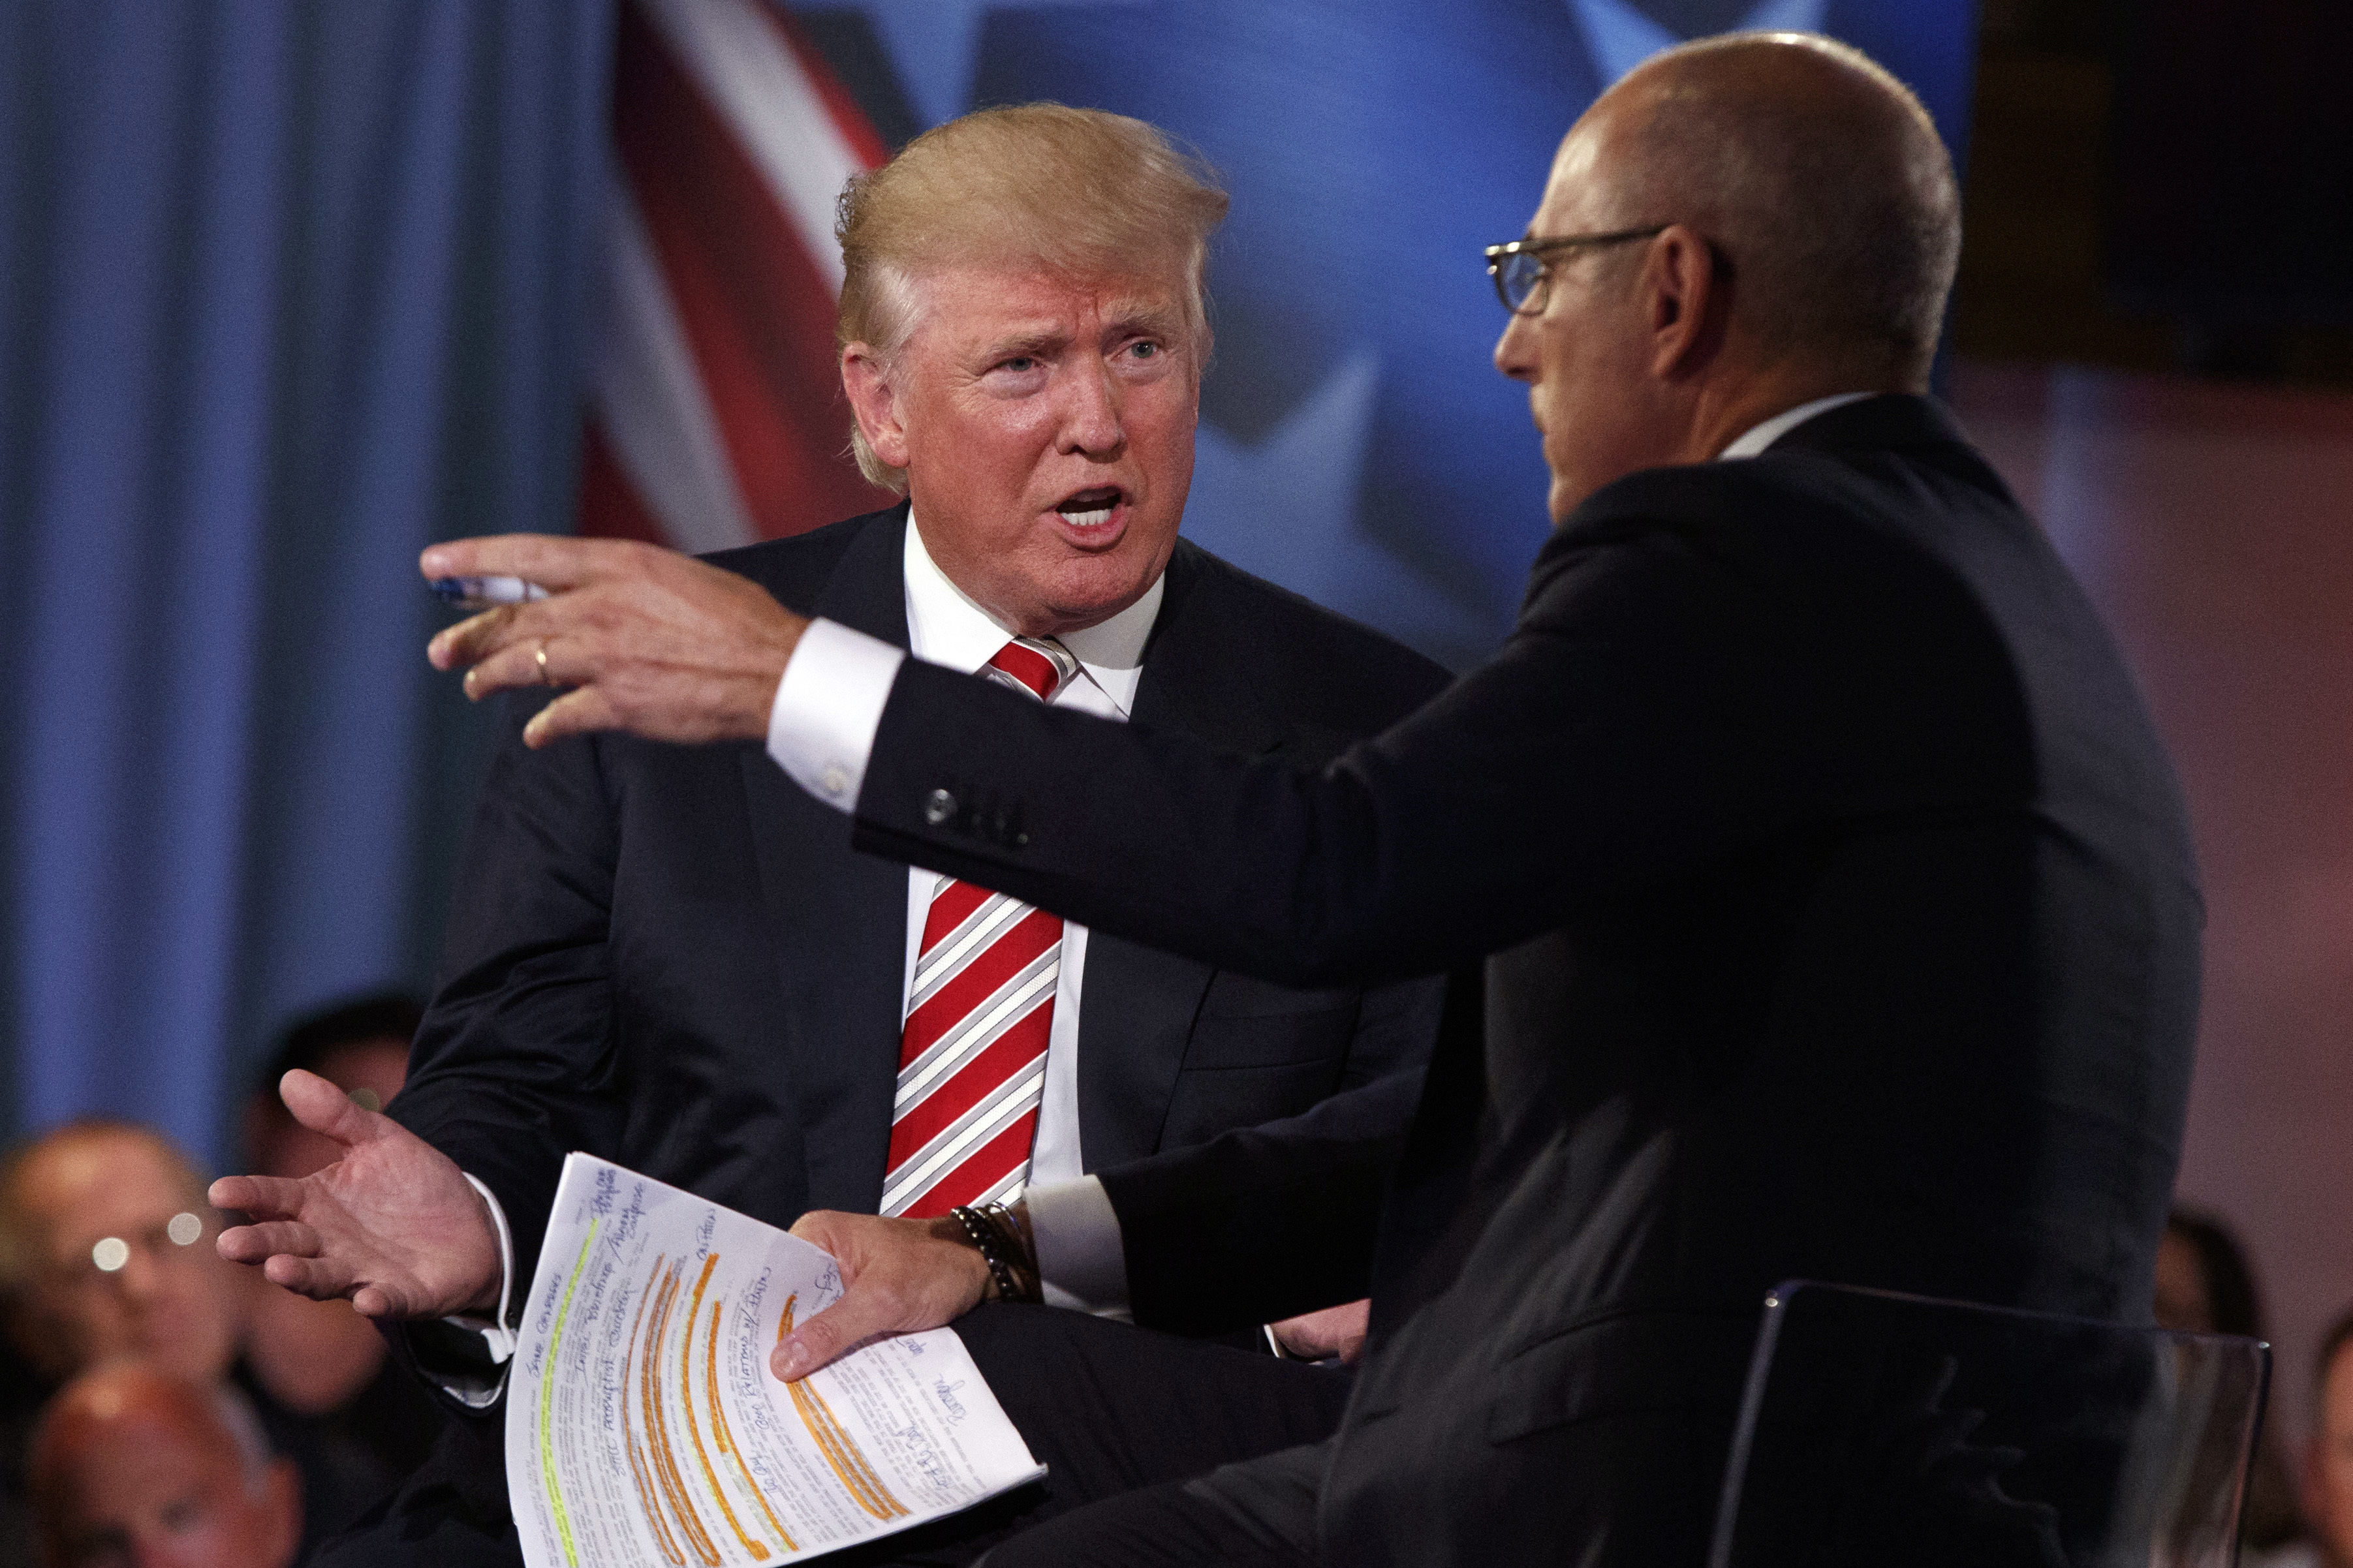 Republican presidential candidate Donald Trump speaks with <i>Today</i> show co-anchor Matt Lauer at the NBC Commander-In-Chief Forum held at the Intrepid Sea, Air and Space museum aboard the decommissioned aircraft carrier Intrepid, New York, Sept. 7, 2016. (Evan Vucci—AP)